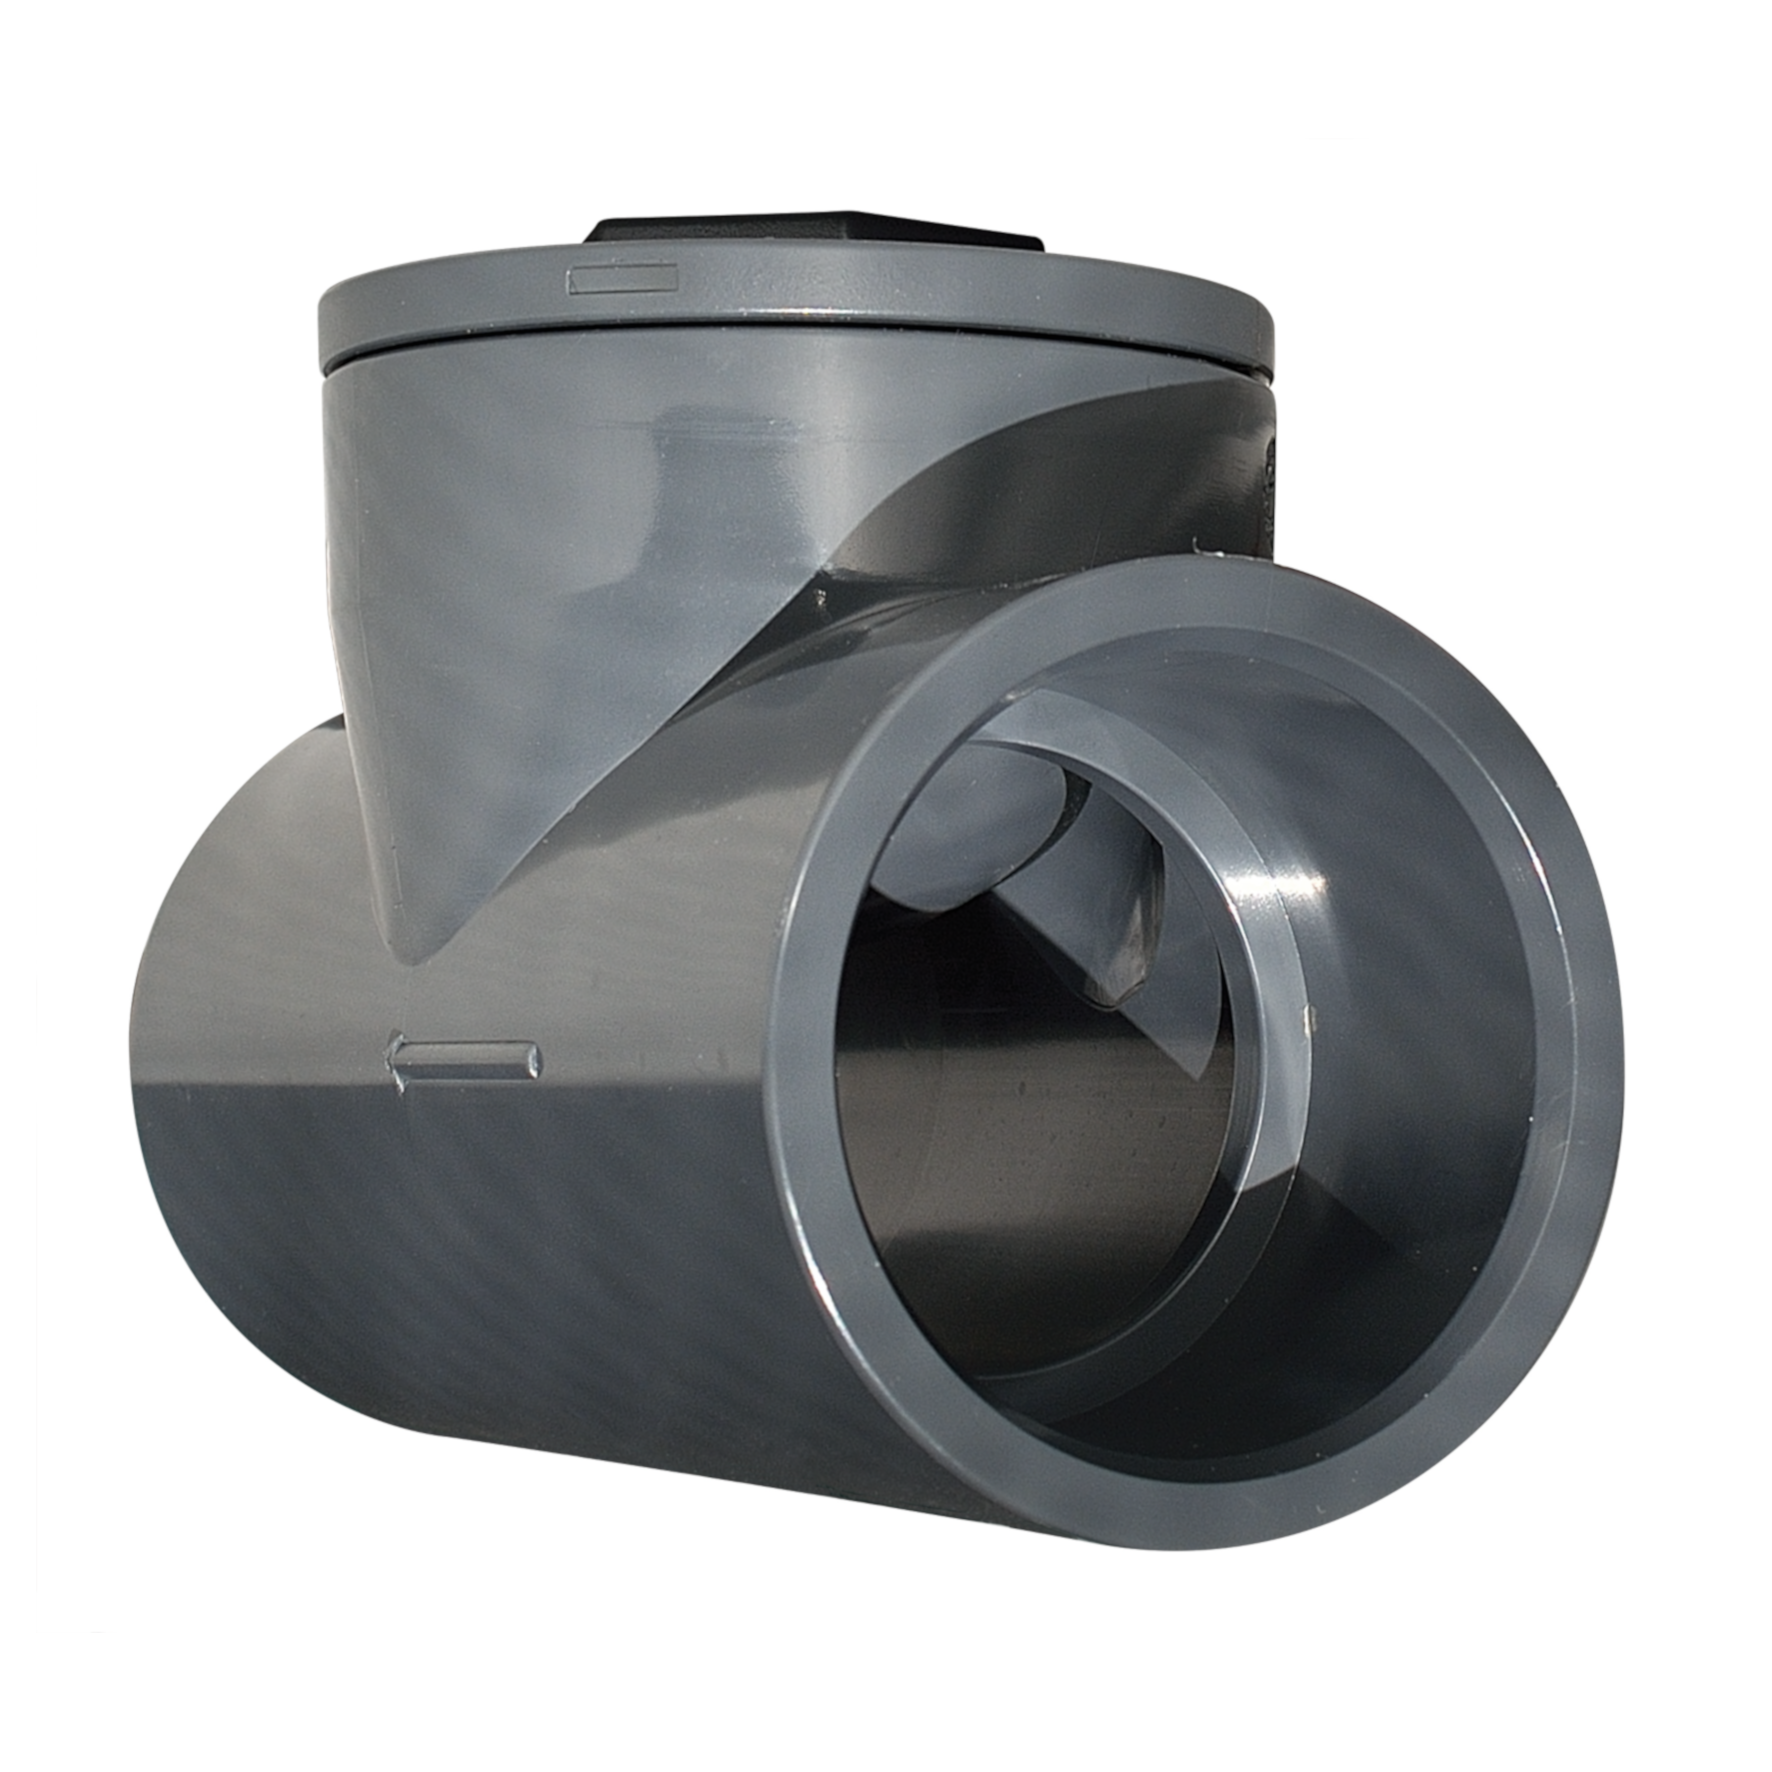 PVC-U tee wafer check valve - EFFAST - 100% Made in Italy